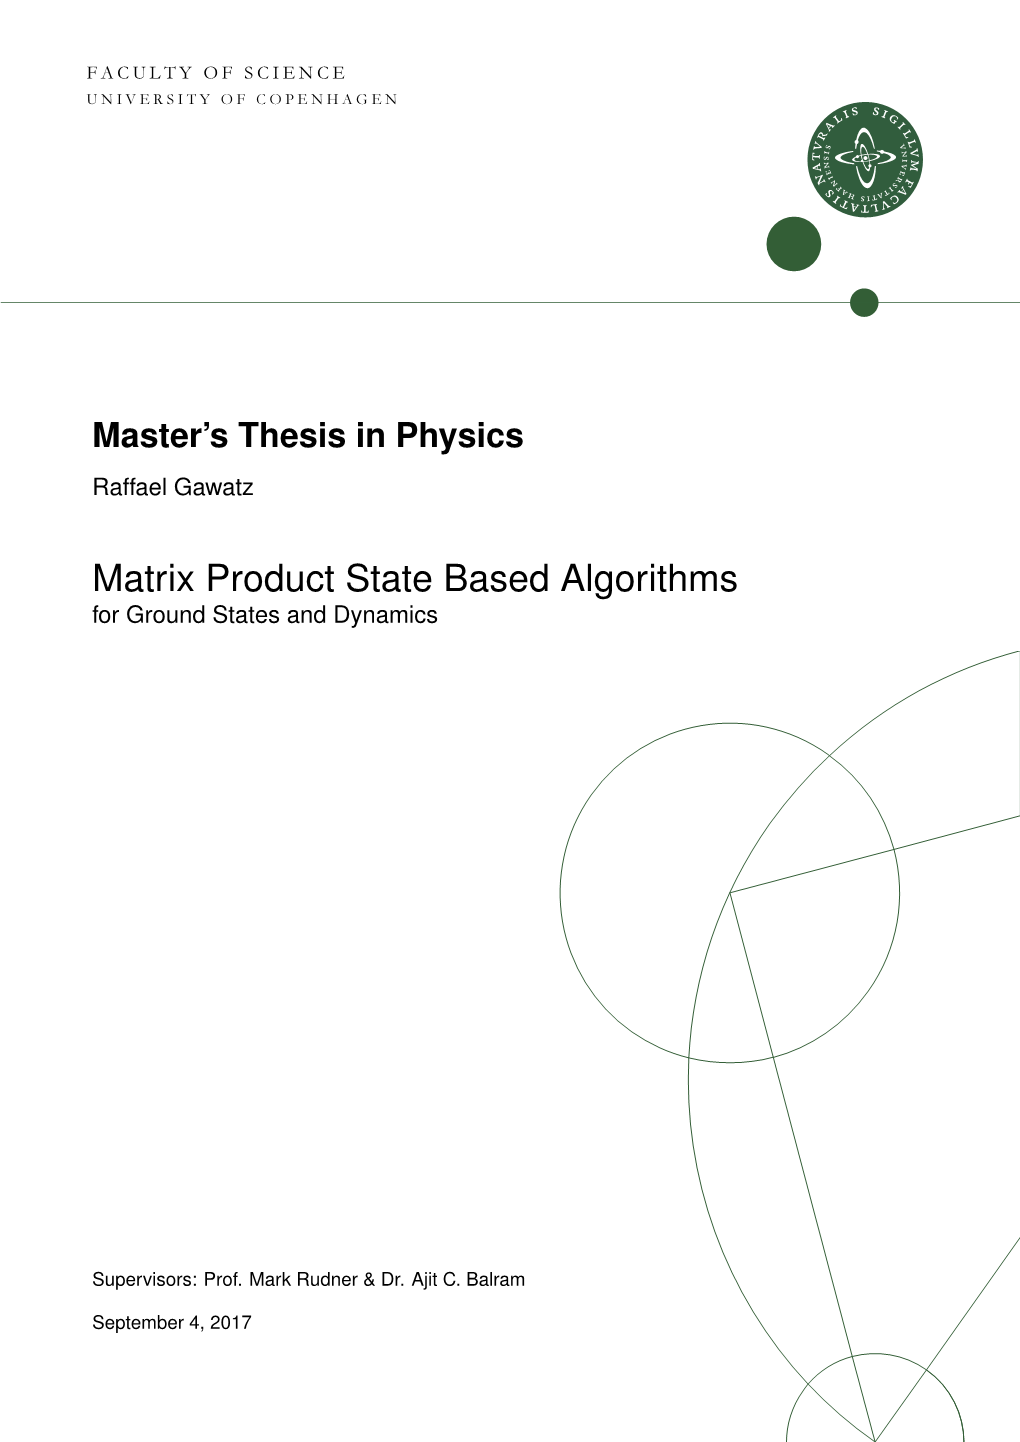 Matrix Product State Based Algorithms for Ground States and Dynamics